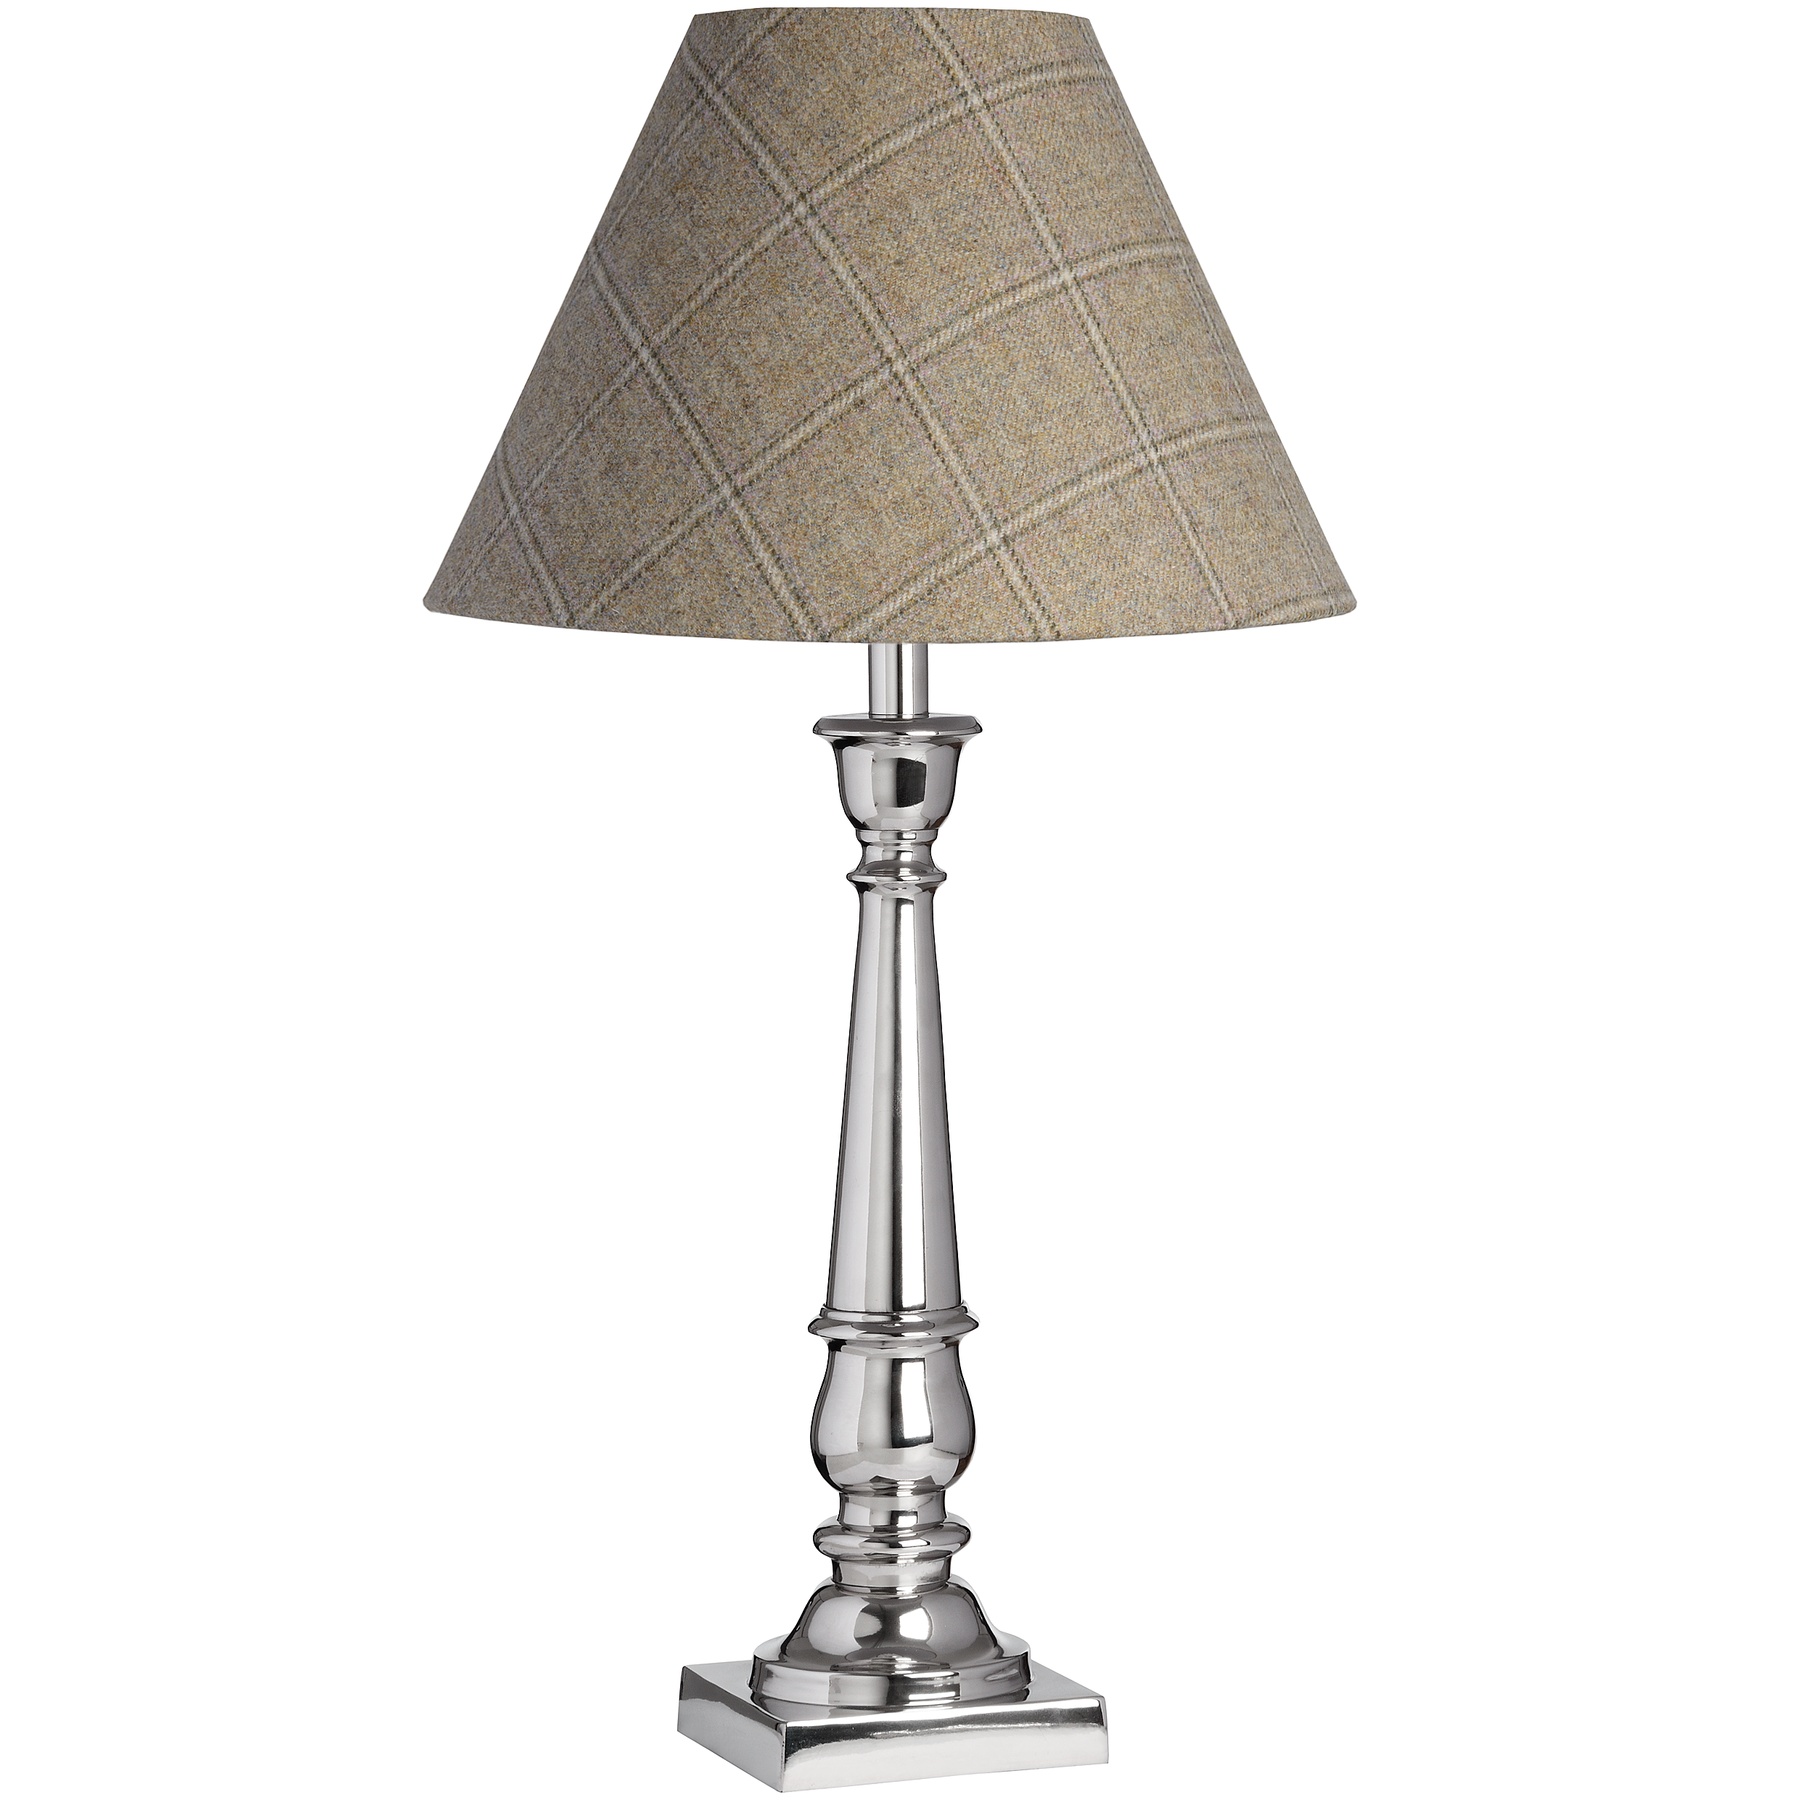 Bronte Table Lamp – Base only